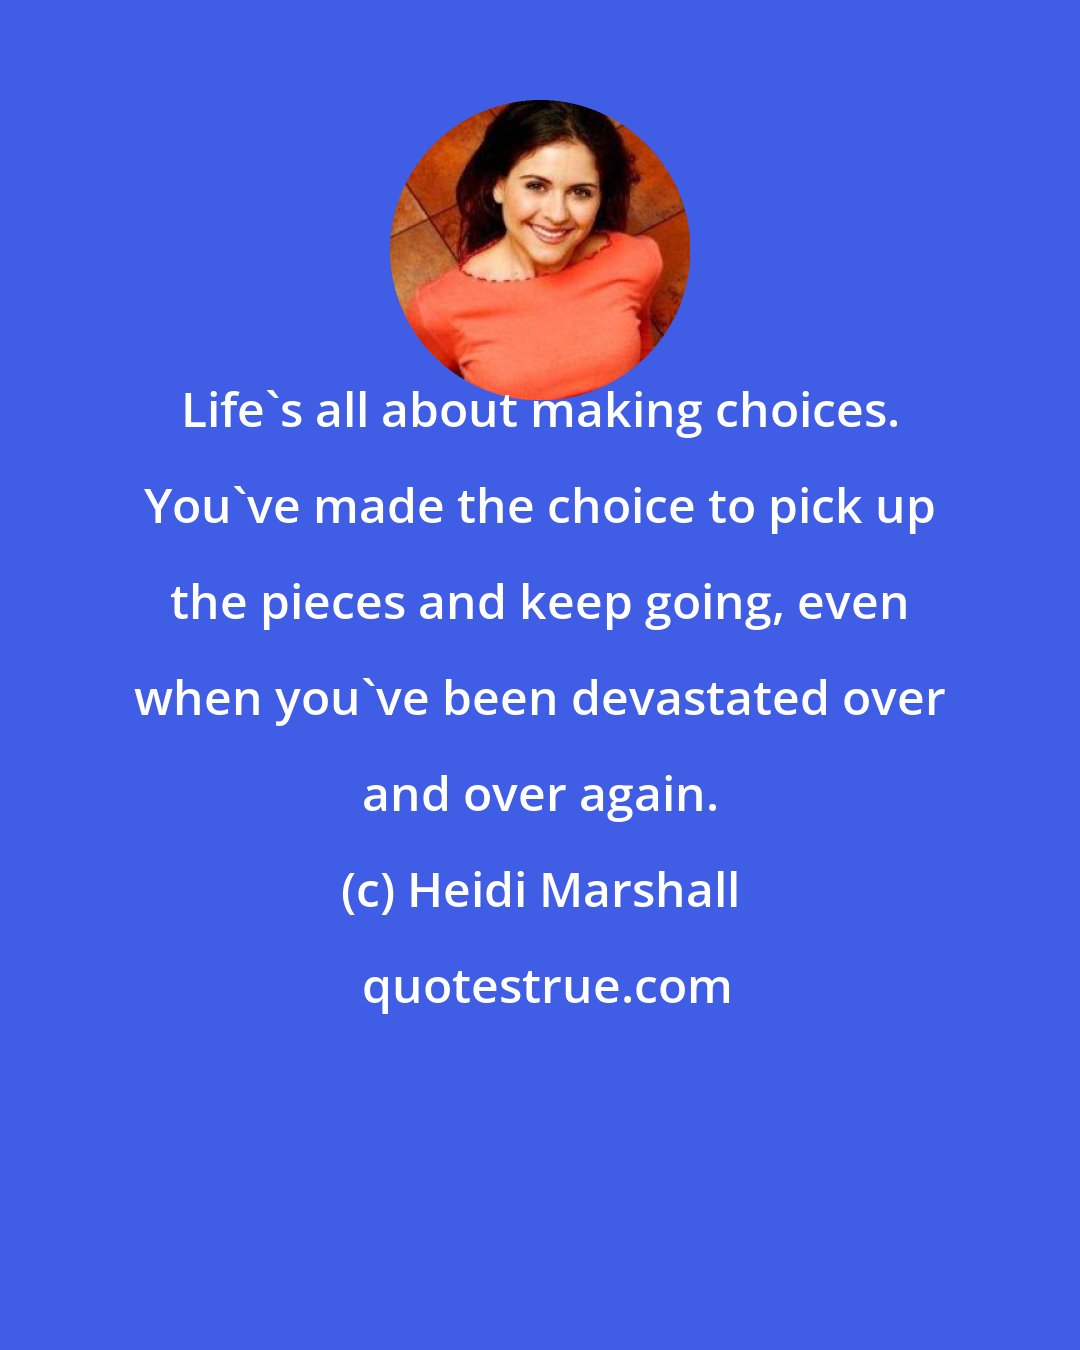 Heidi Marshall: Life's all about making choices. You've made the choice to pick up the pieces and keep going, even when you've been devastated over and over again.